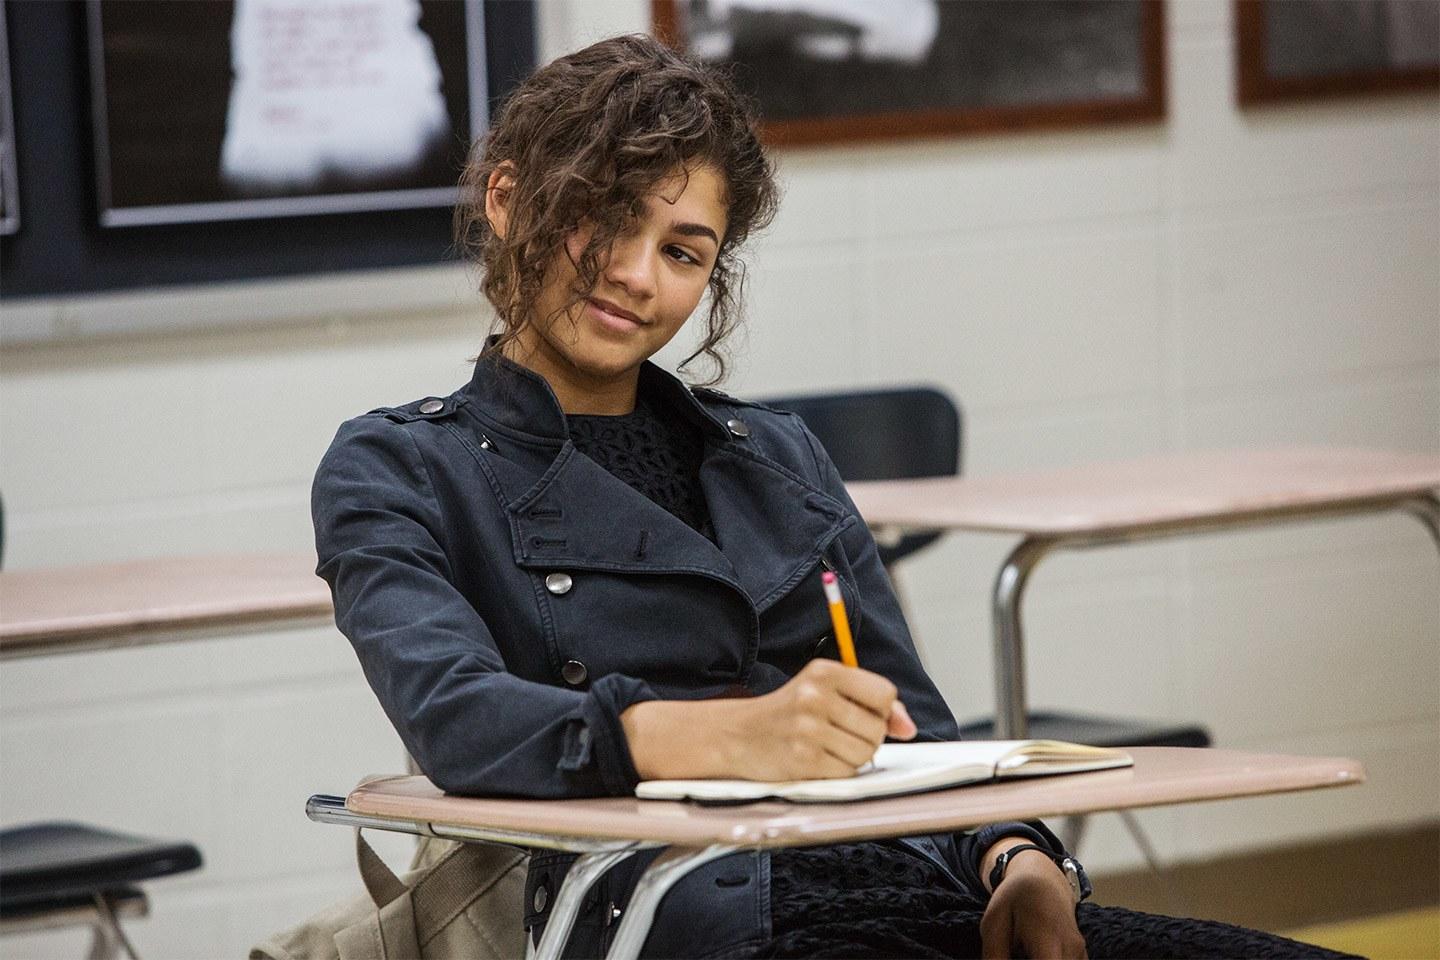 Who Does Zendaya Play In Spider Man: Homecoming?